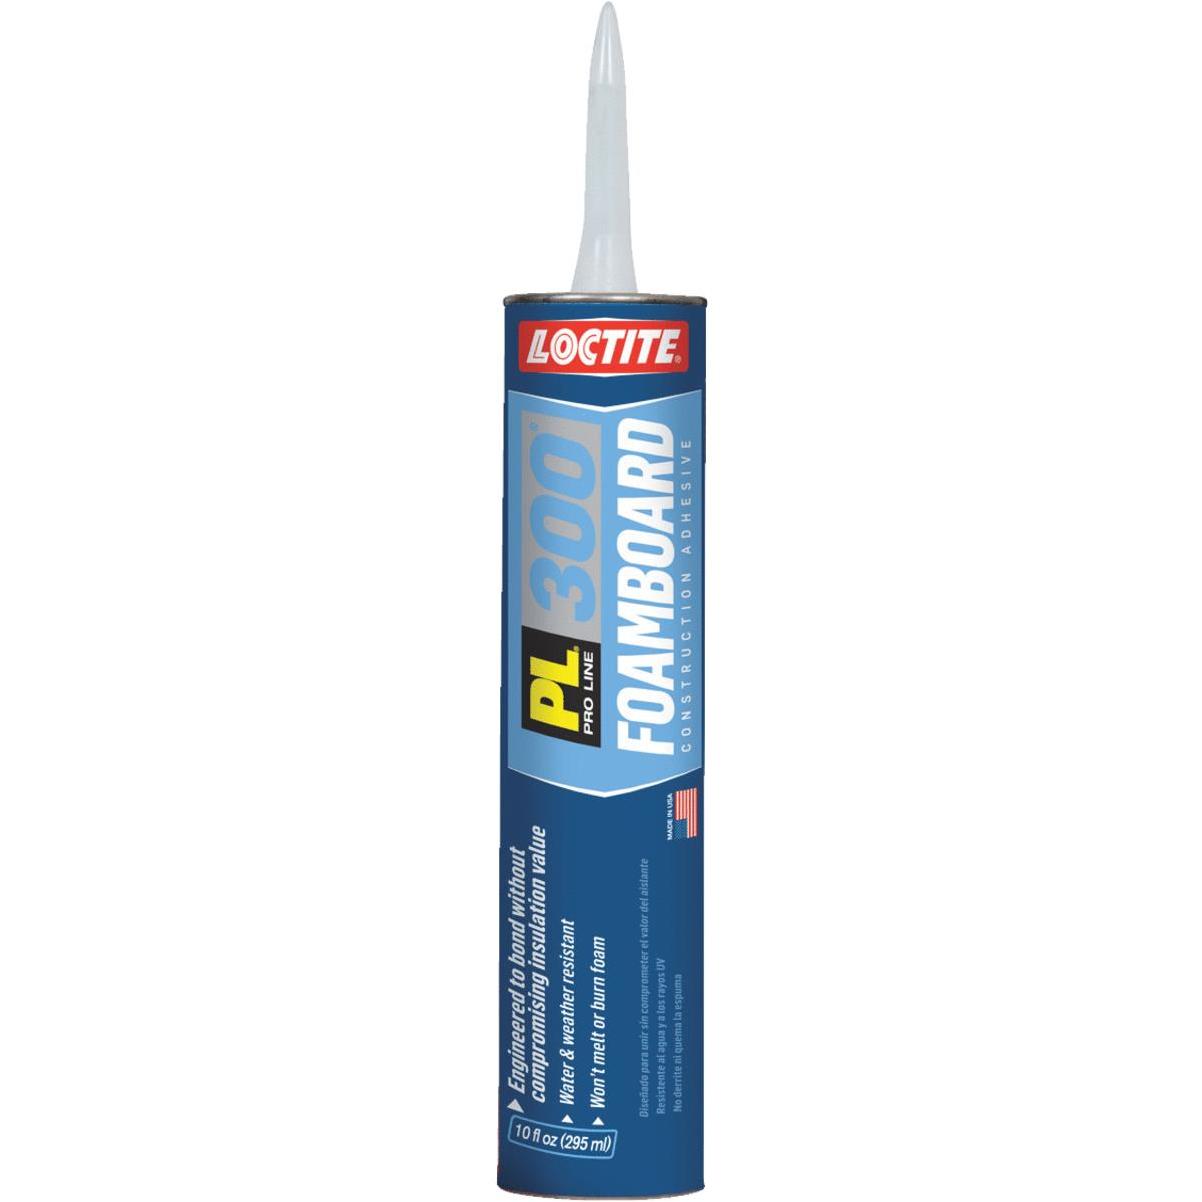 Loctite Power Grab Express 9 fl. oz. All Purpose Construction Adhesive (12-Pack)